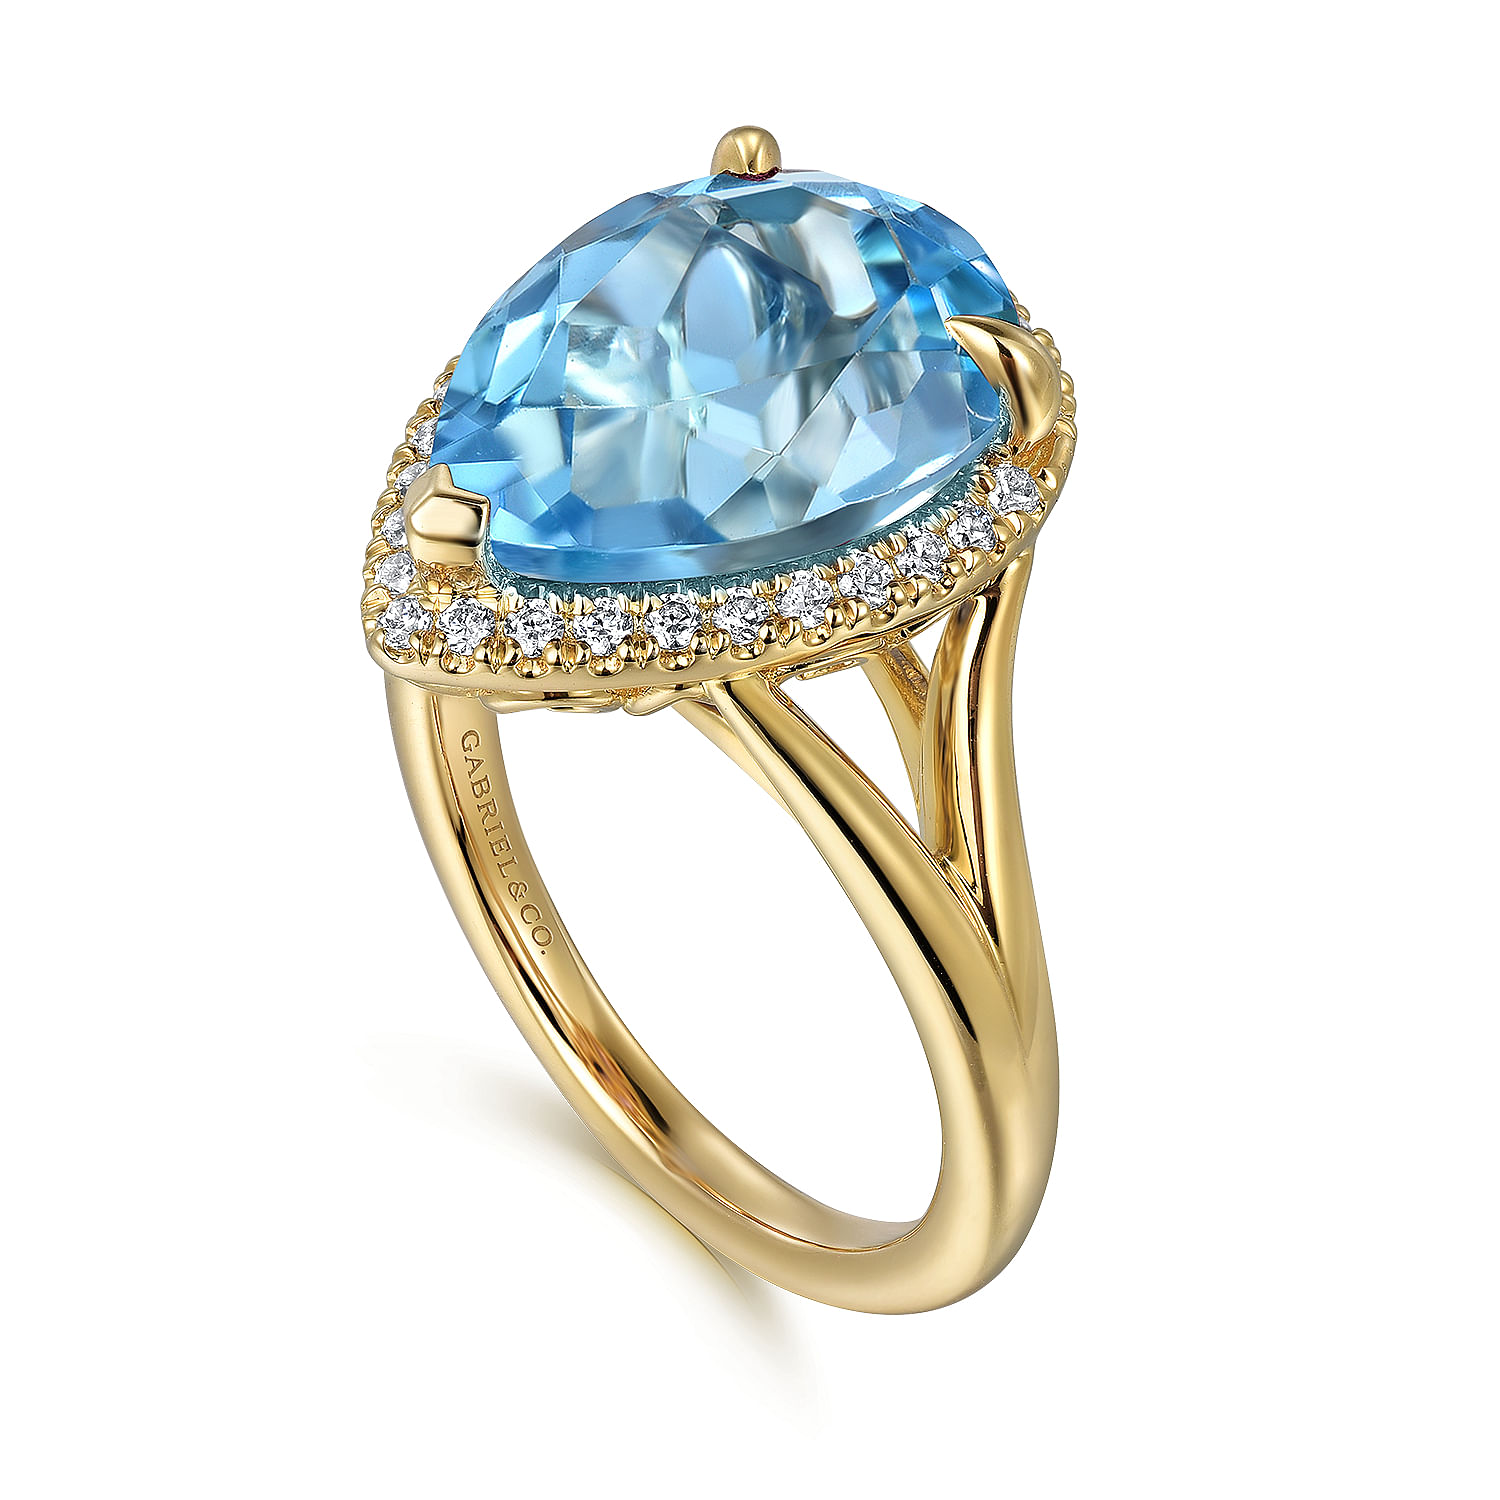 14K Yellow Gold Diamond and Flat Pear Shape Blue Topaz Ladies Ring With Flower Pattern Gallery